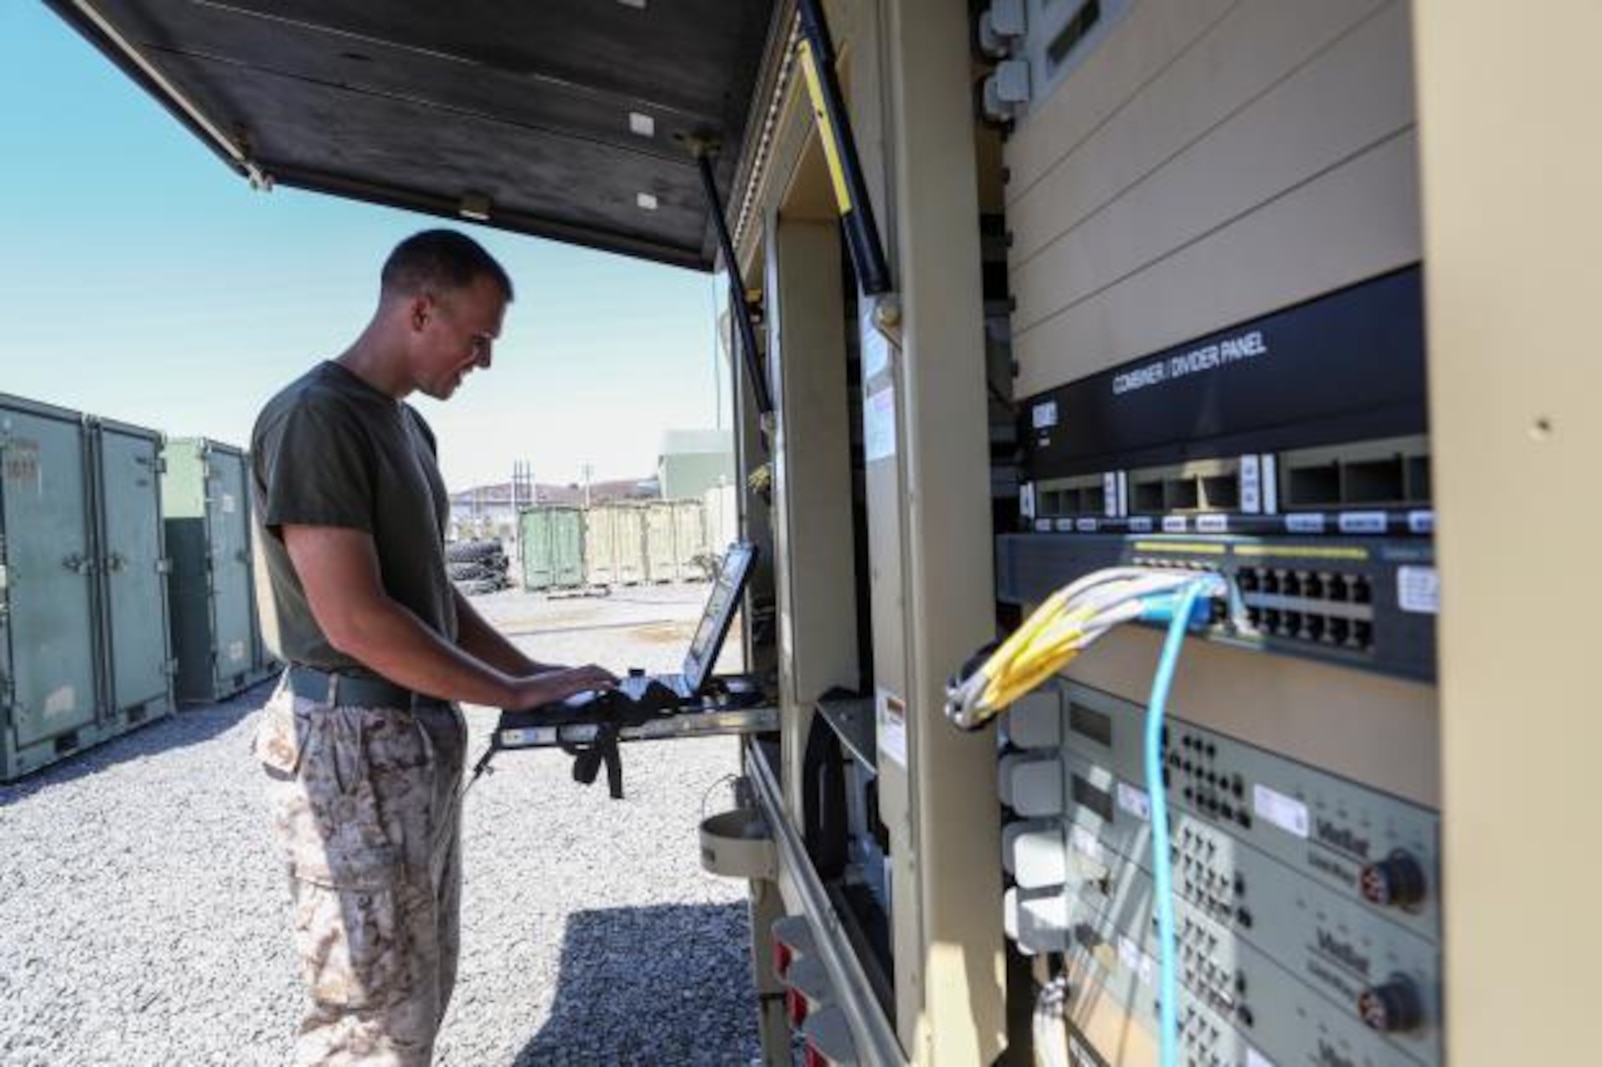 U.S. Marine Cpl. Matthew Peterson works on communication equipment during Command Post Exercise 3 aboard Camp Pendleton, Calif., June 28, 2016. Peterson is a field radio operator with Communications Company, Headquarters Regiment, 1st Marine Logistics Group. During the exercise, Marines with Communications Company proved they could communicate not only within their own subordinate and adjacent units, but also 3rd Marine Air Craft Wing, 1st Marine Division, and I Marine Expeditionary Force. (U.S. Marine Corps photo by Sgt. Laura Gauna/ Released)